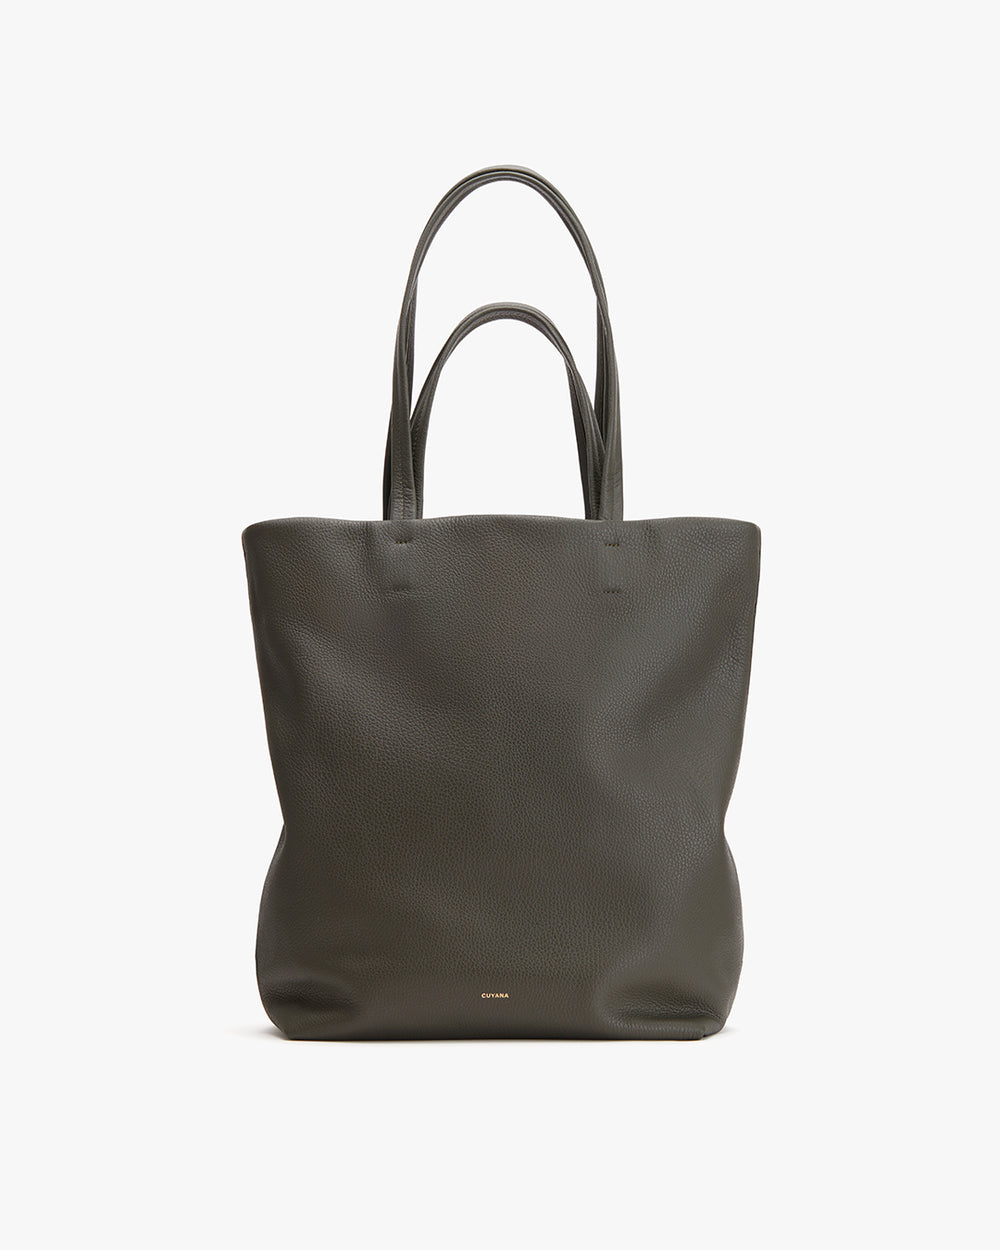 A large tote bag with two handles standing on a plain surface.